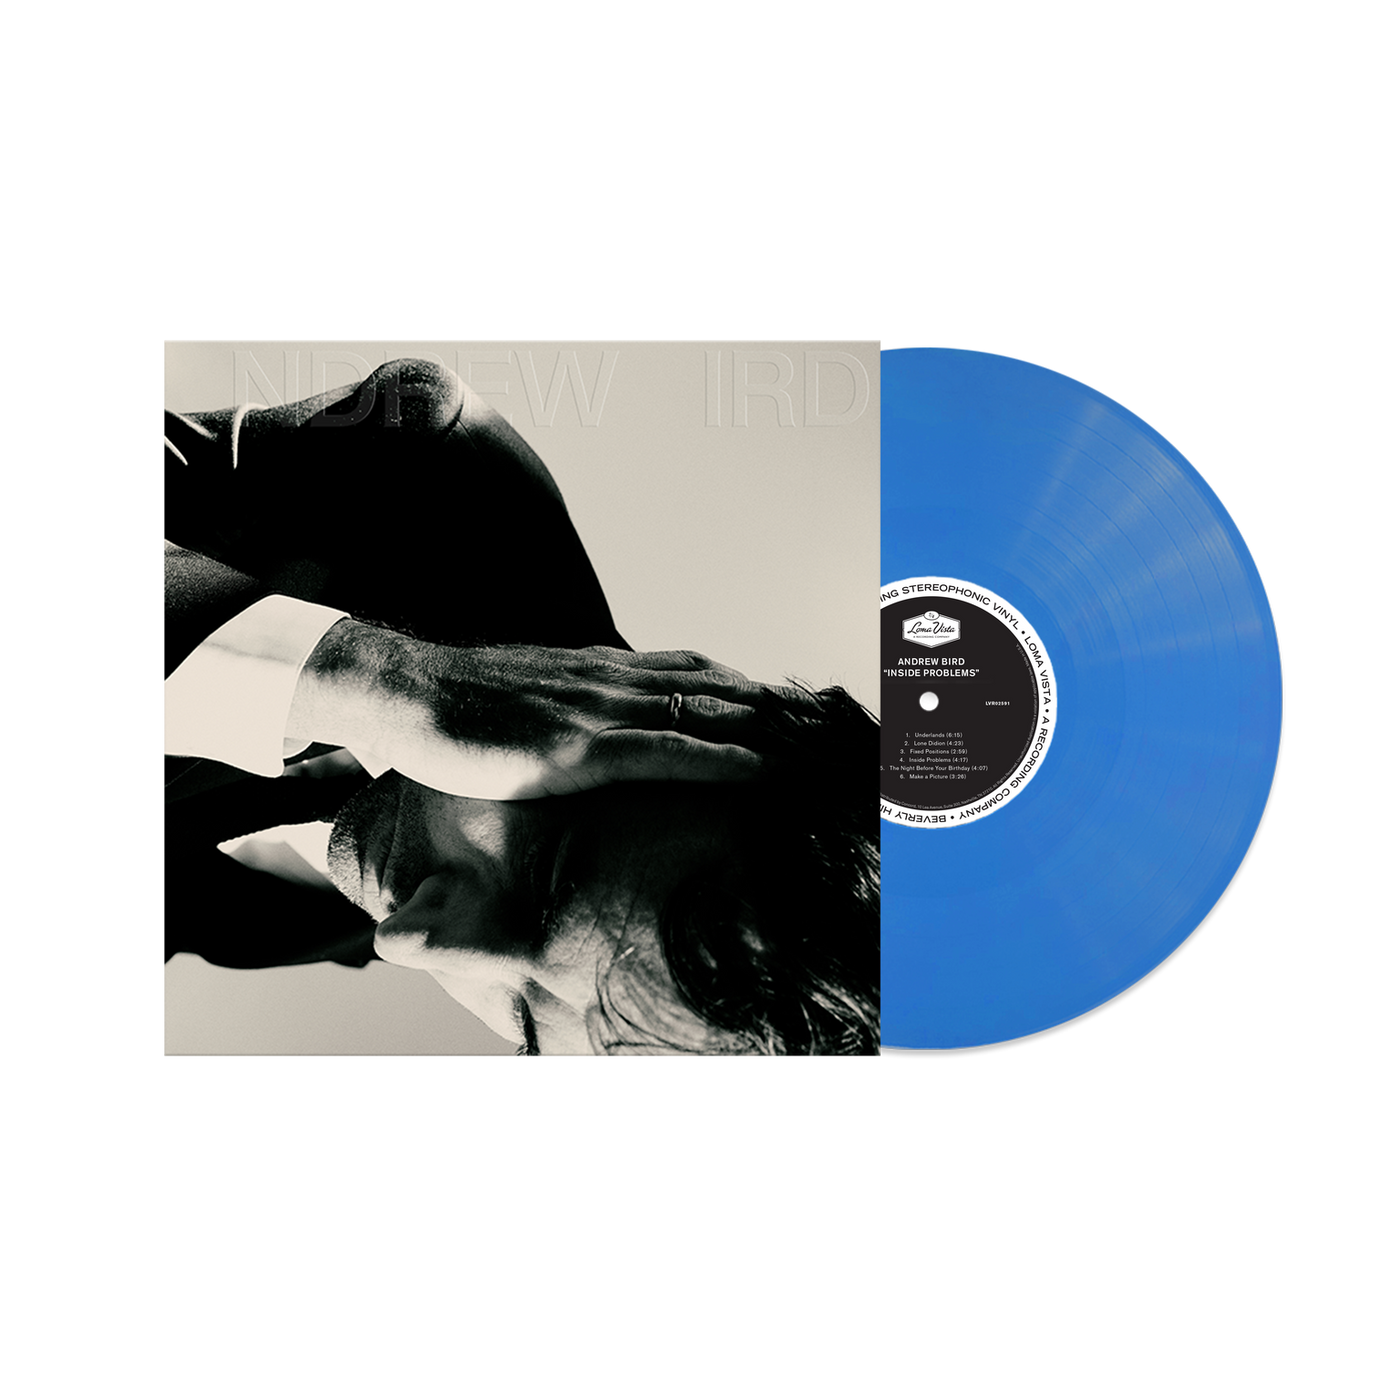 Inside Problems Limited Edition "Sky Blue"Colored Vinyl